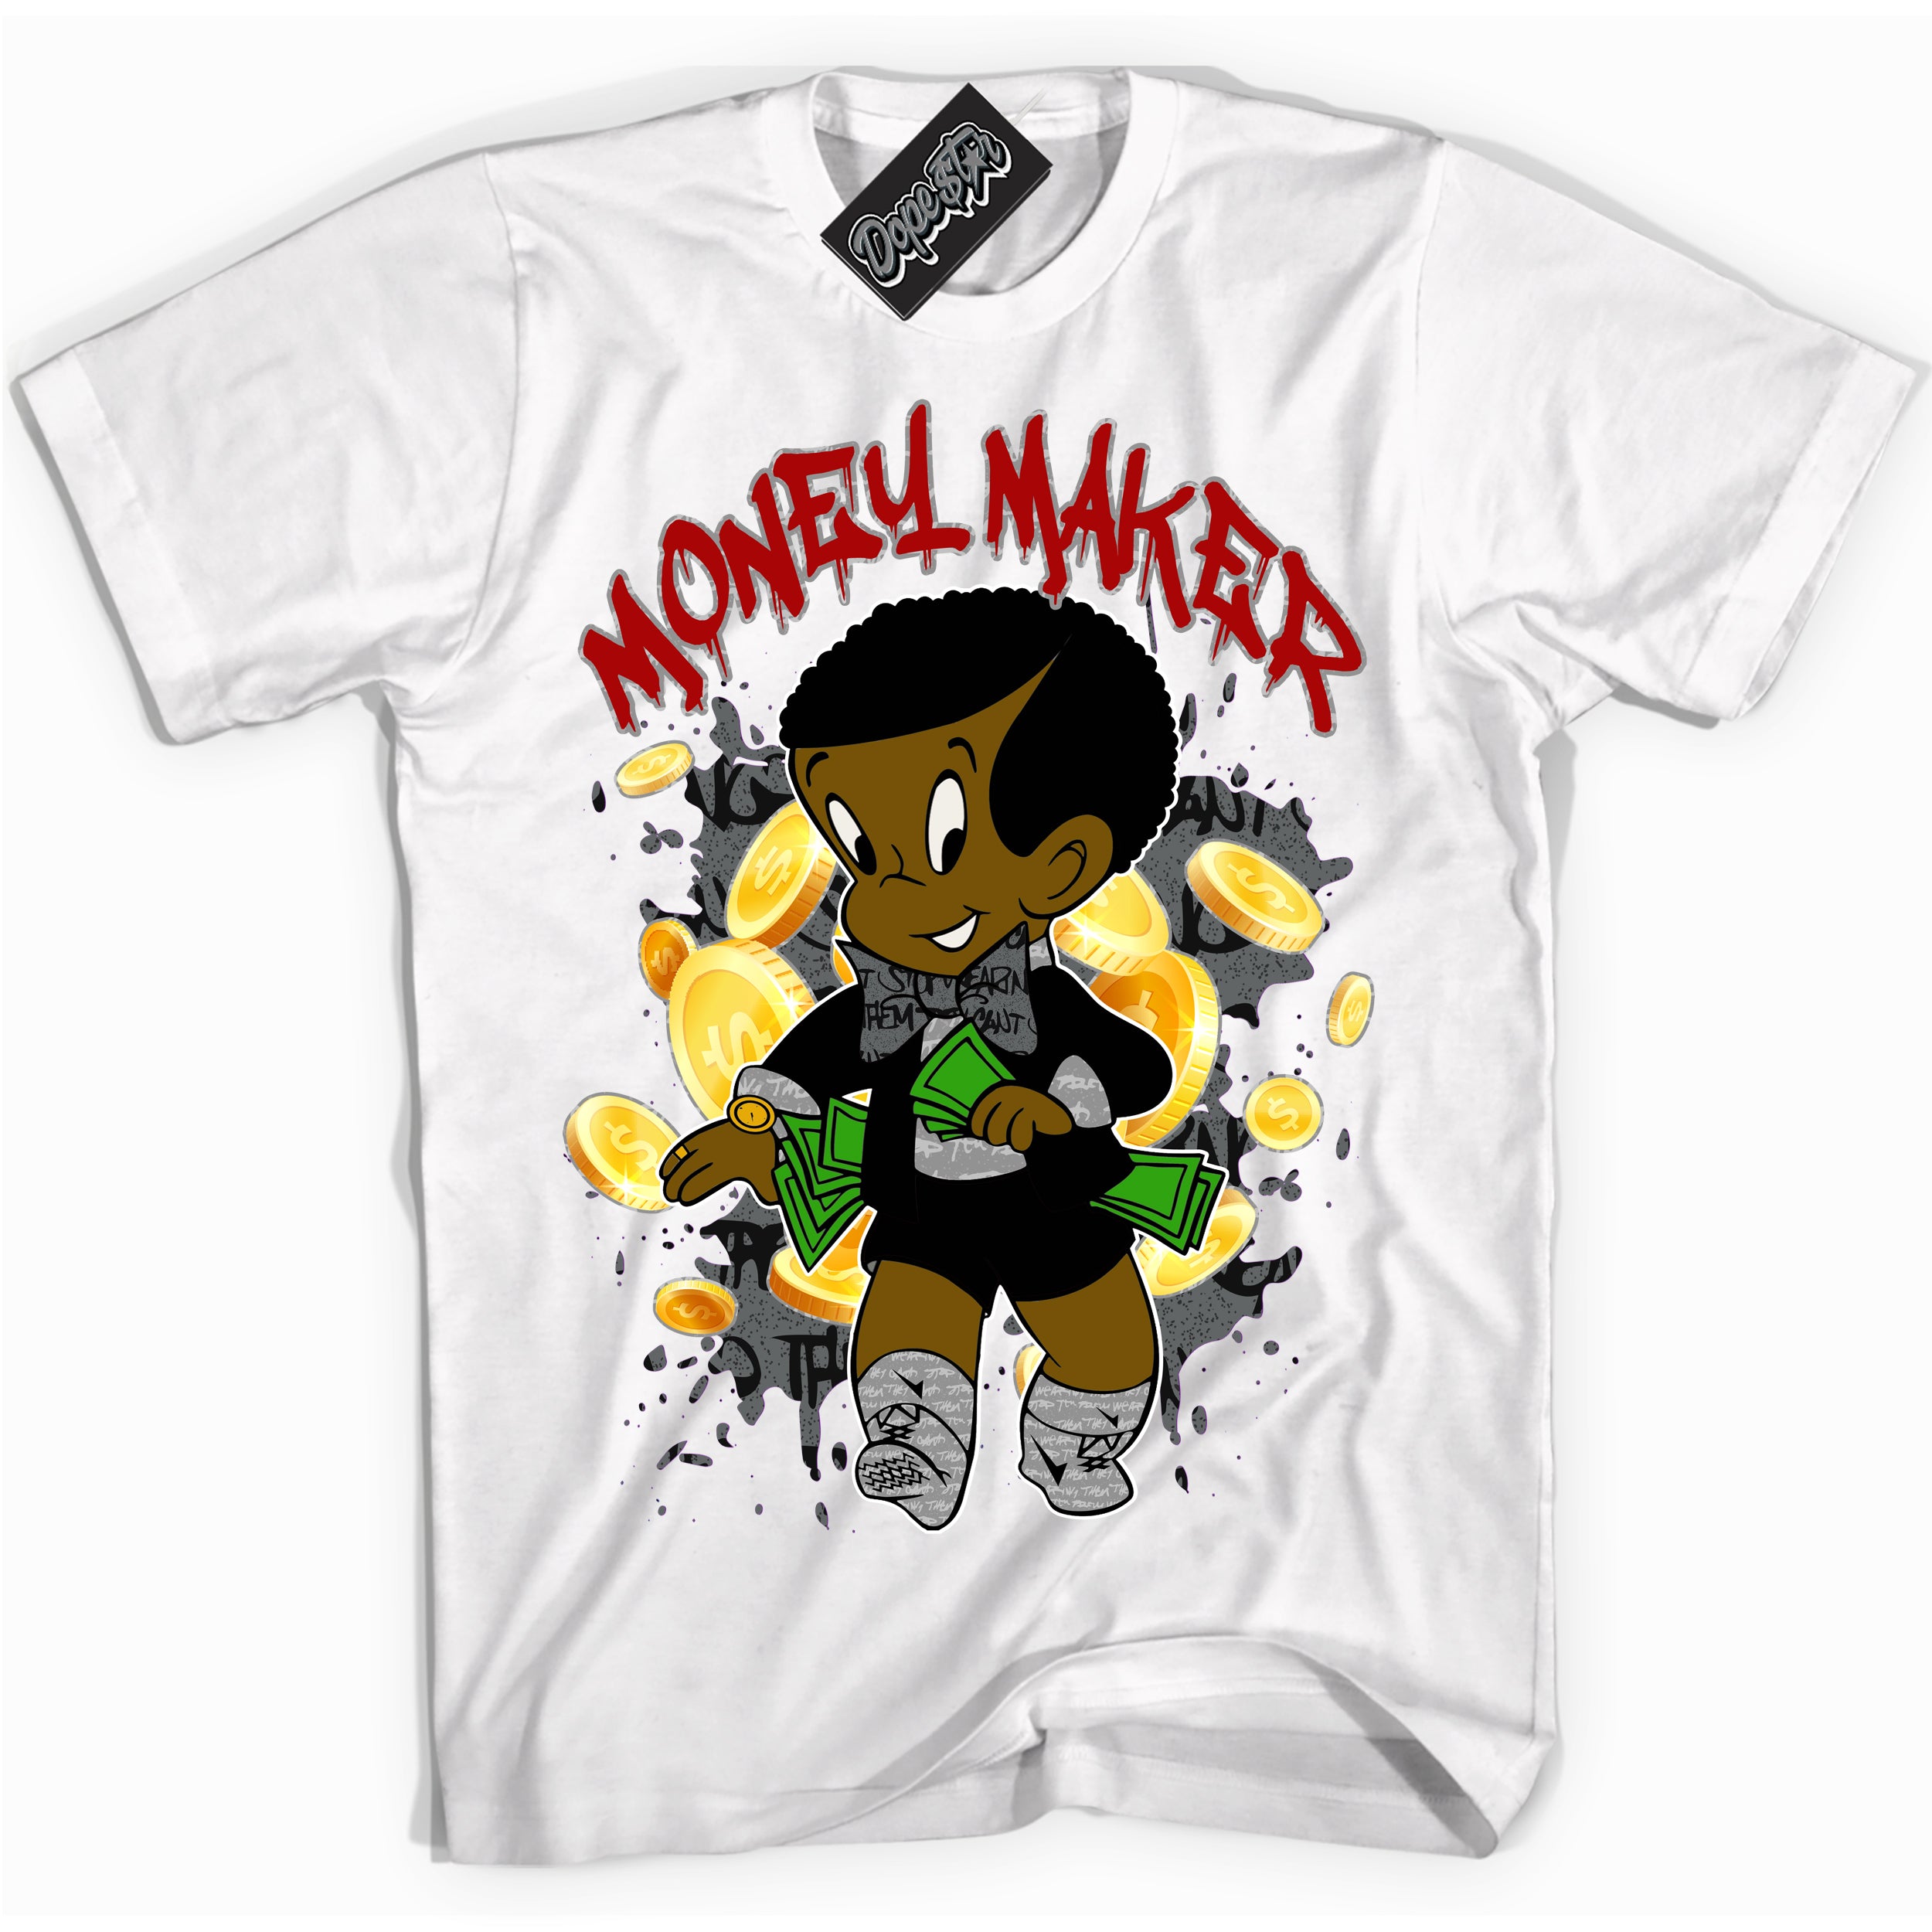 Cool White Shirt with “ Money Maker ” design that perfectly matches Rebellionaire 1s Sneakers.